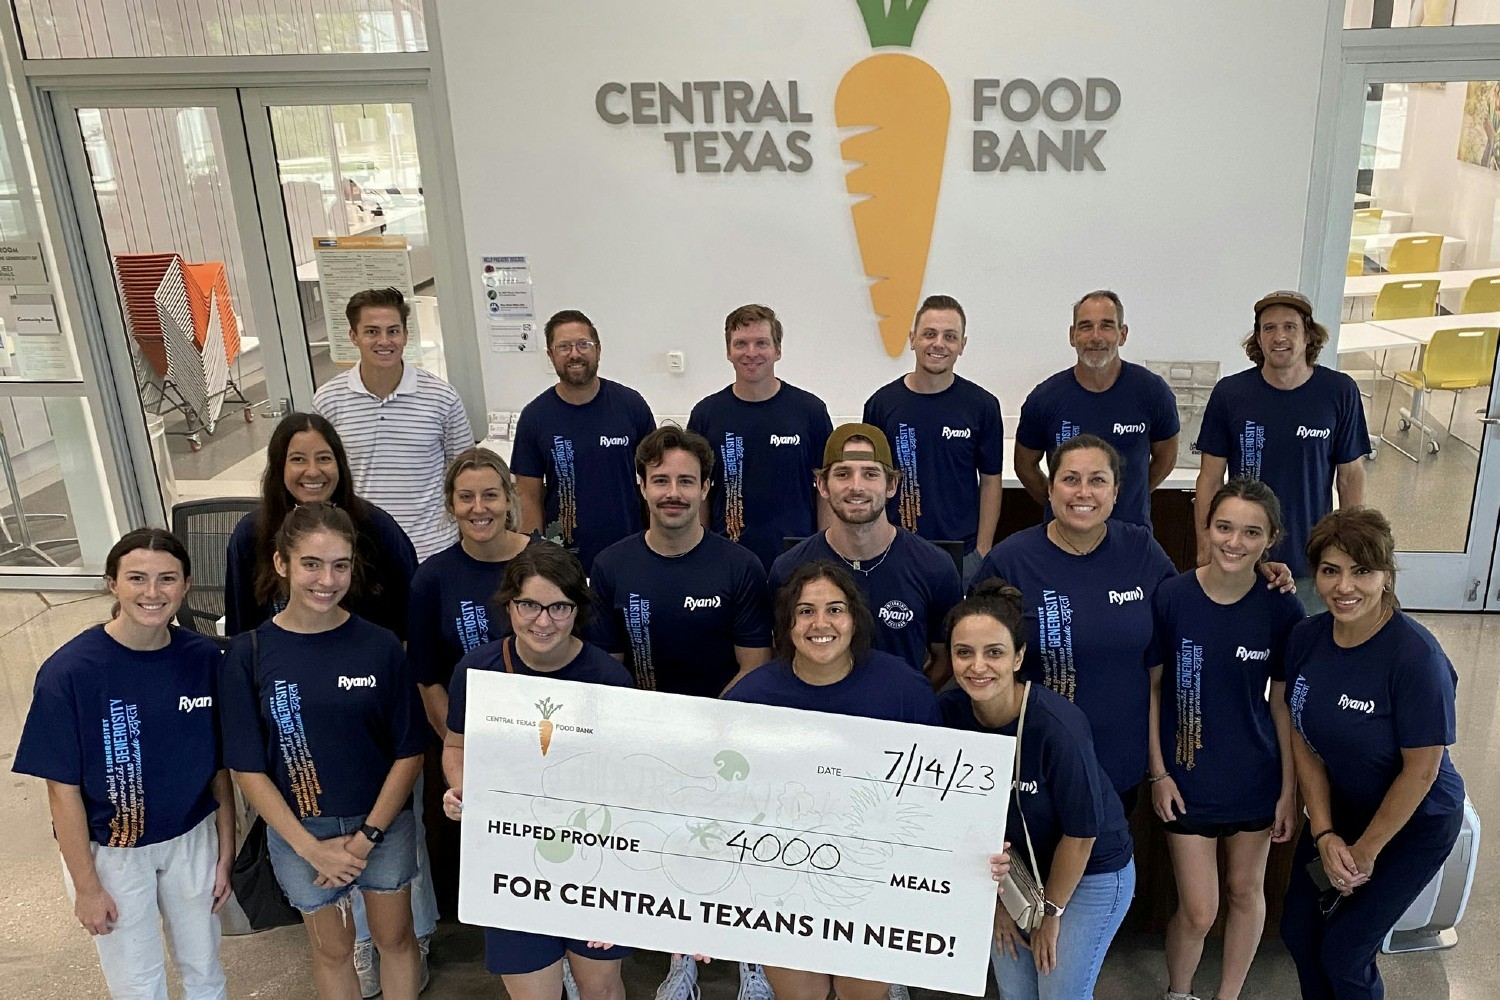 Our Austin team members had a productive shift at the Central Texas Food Bank.  